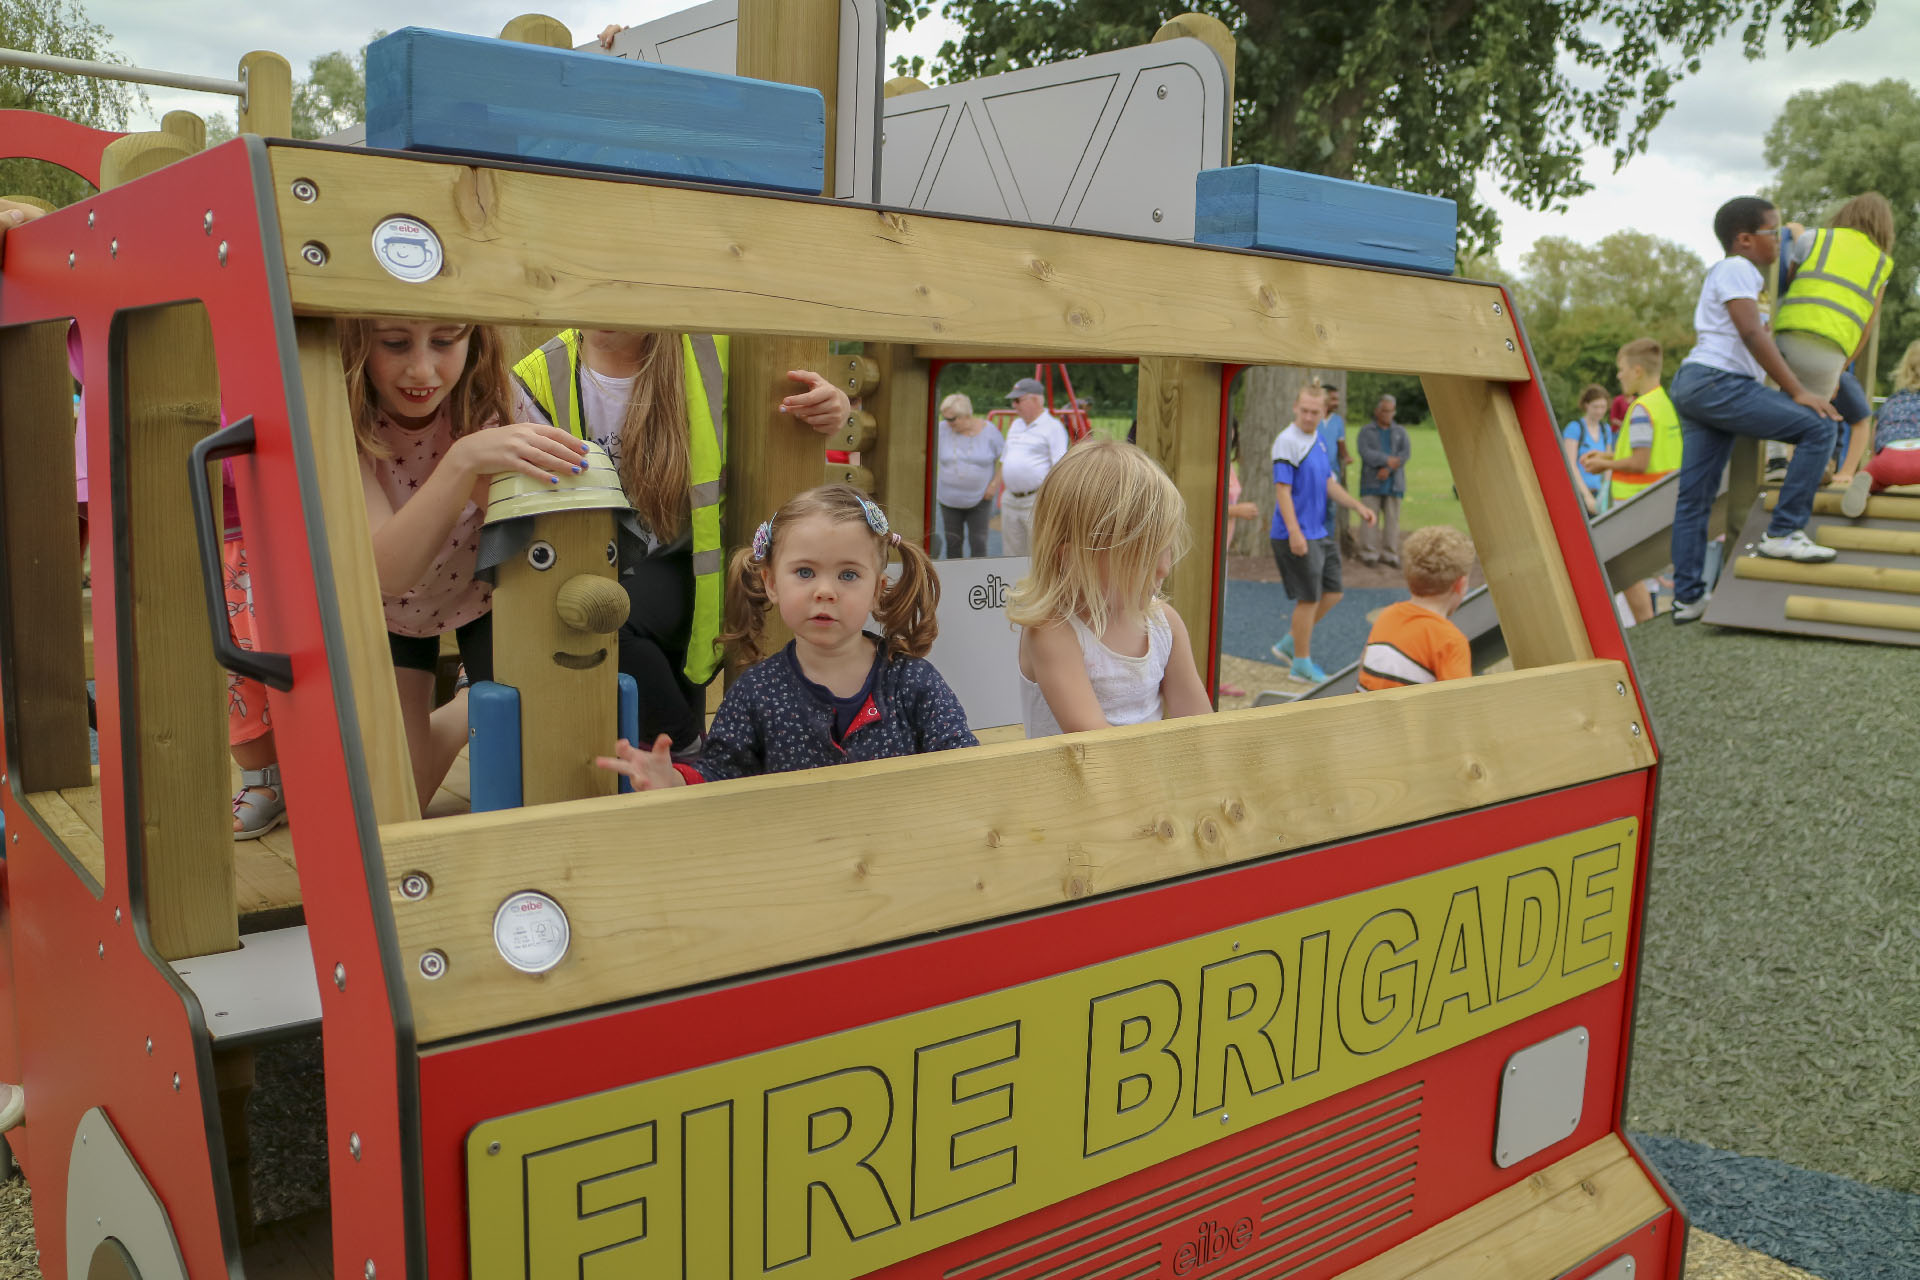 Roleplaying - Children in a play unit in the shape of a fire engine by eibe.